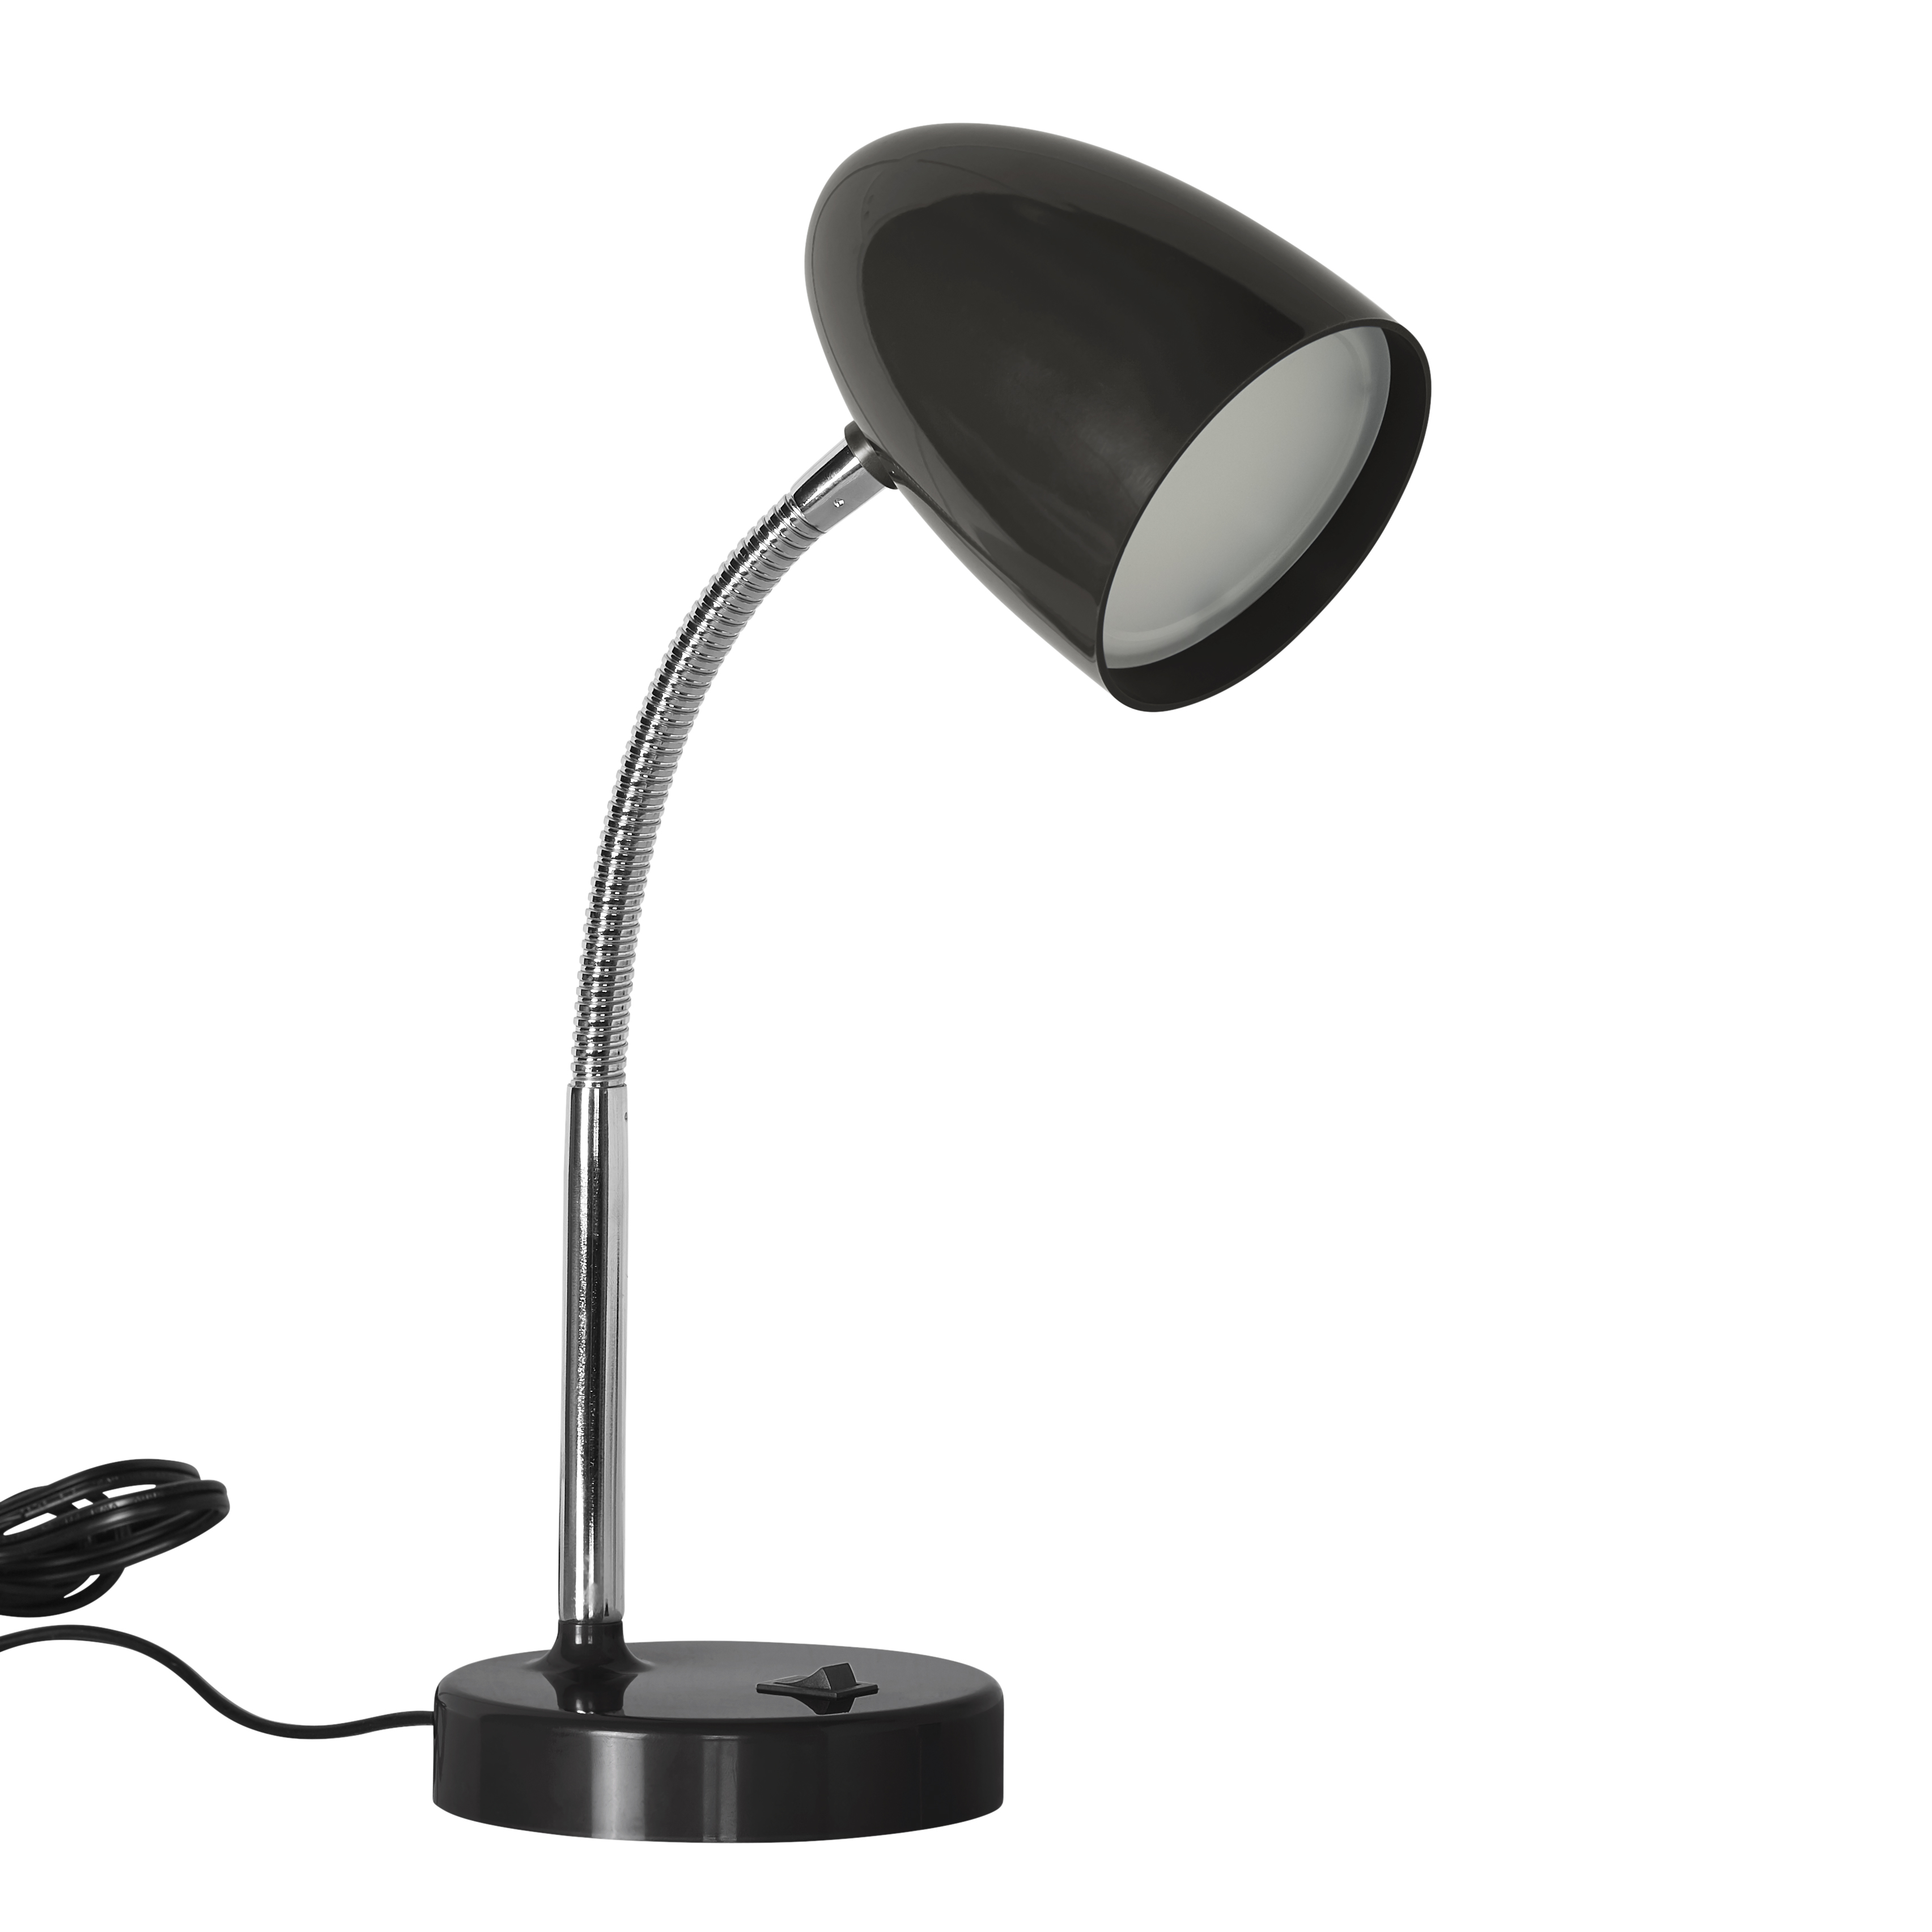 Desk Lamps sources and
features